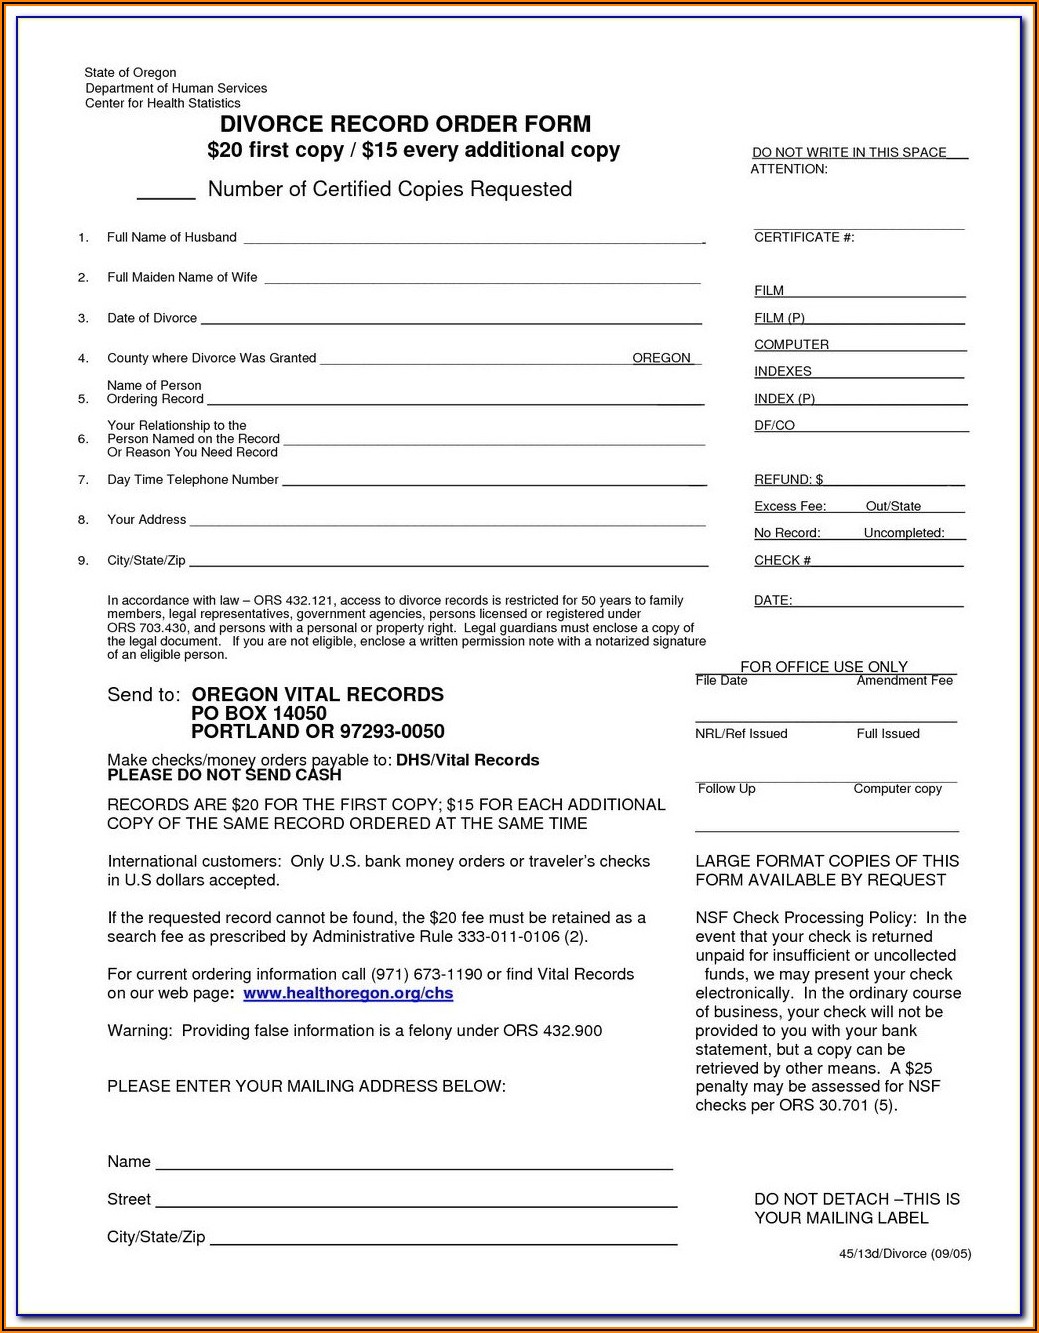 Clackamas County Probate Court Forms